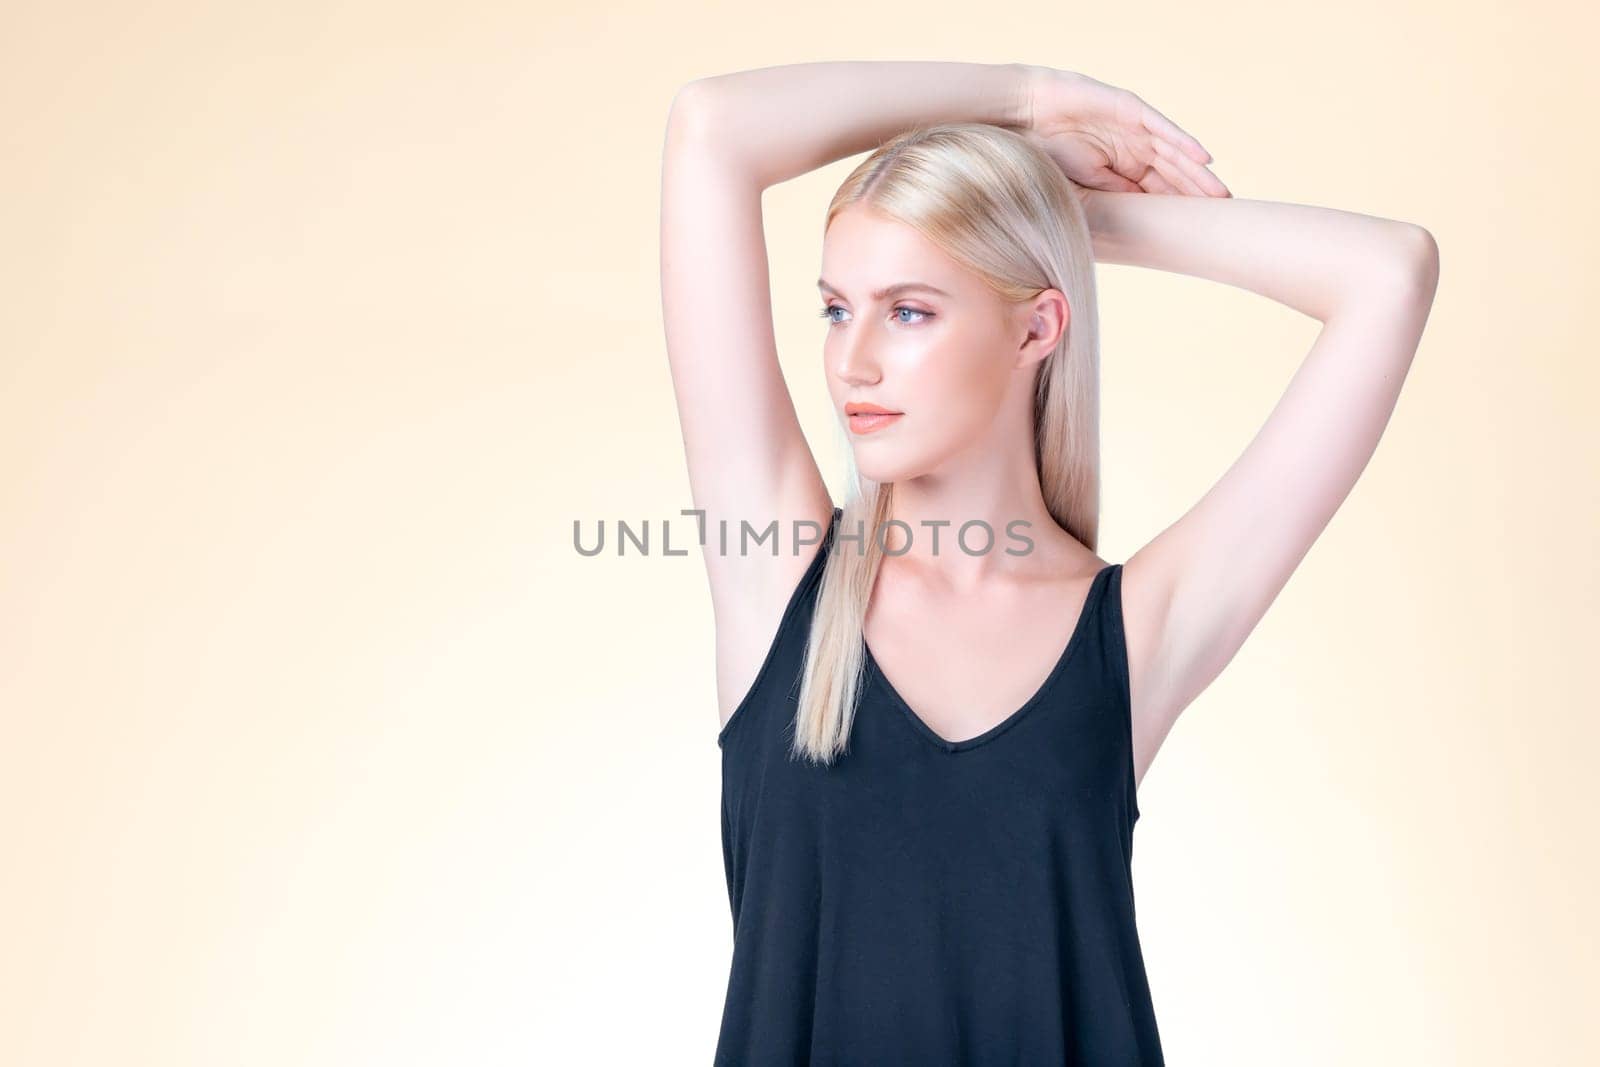 Personable woman lifting her armpit showing clean and hygiene underarm. by biancoblue